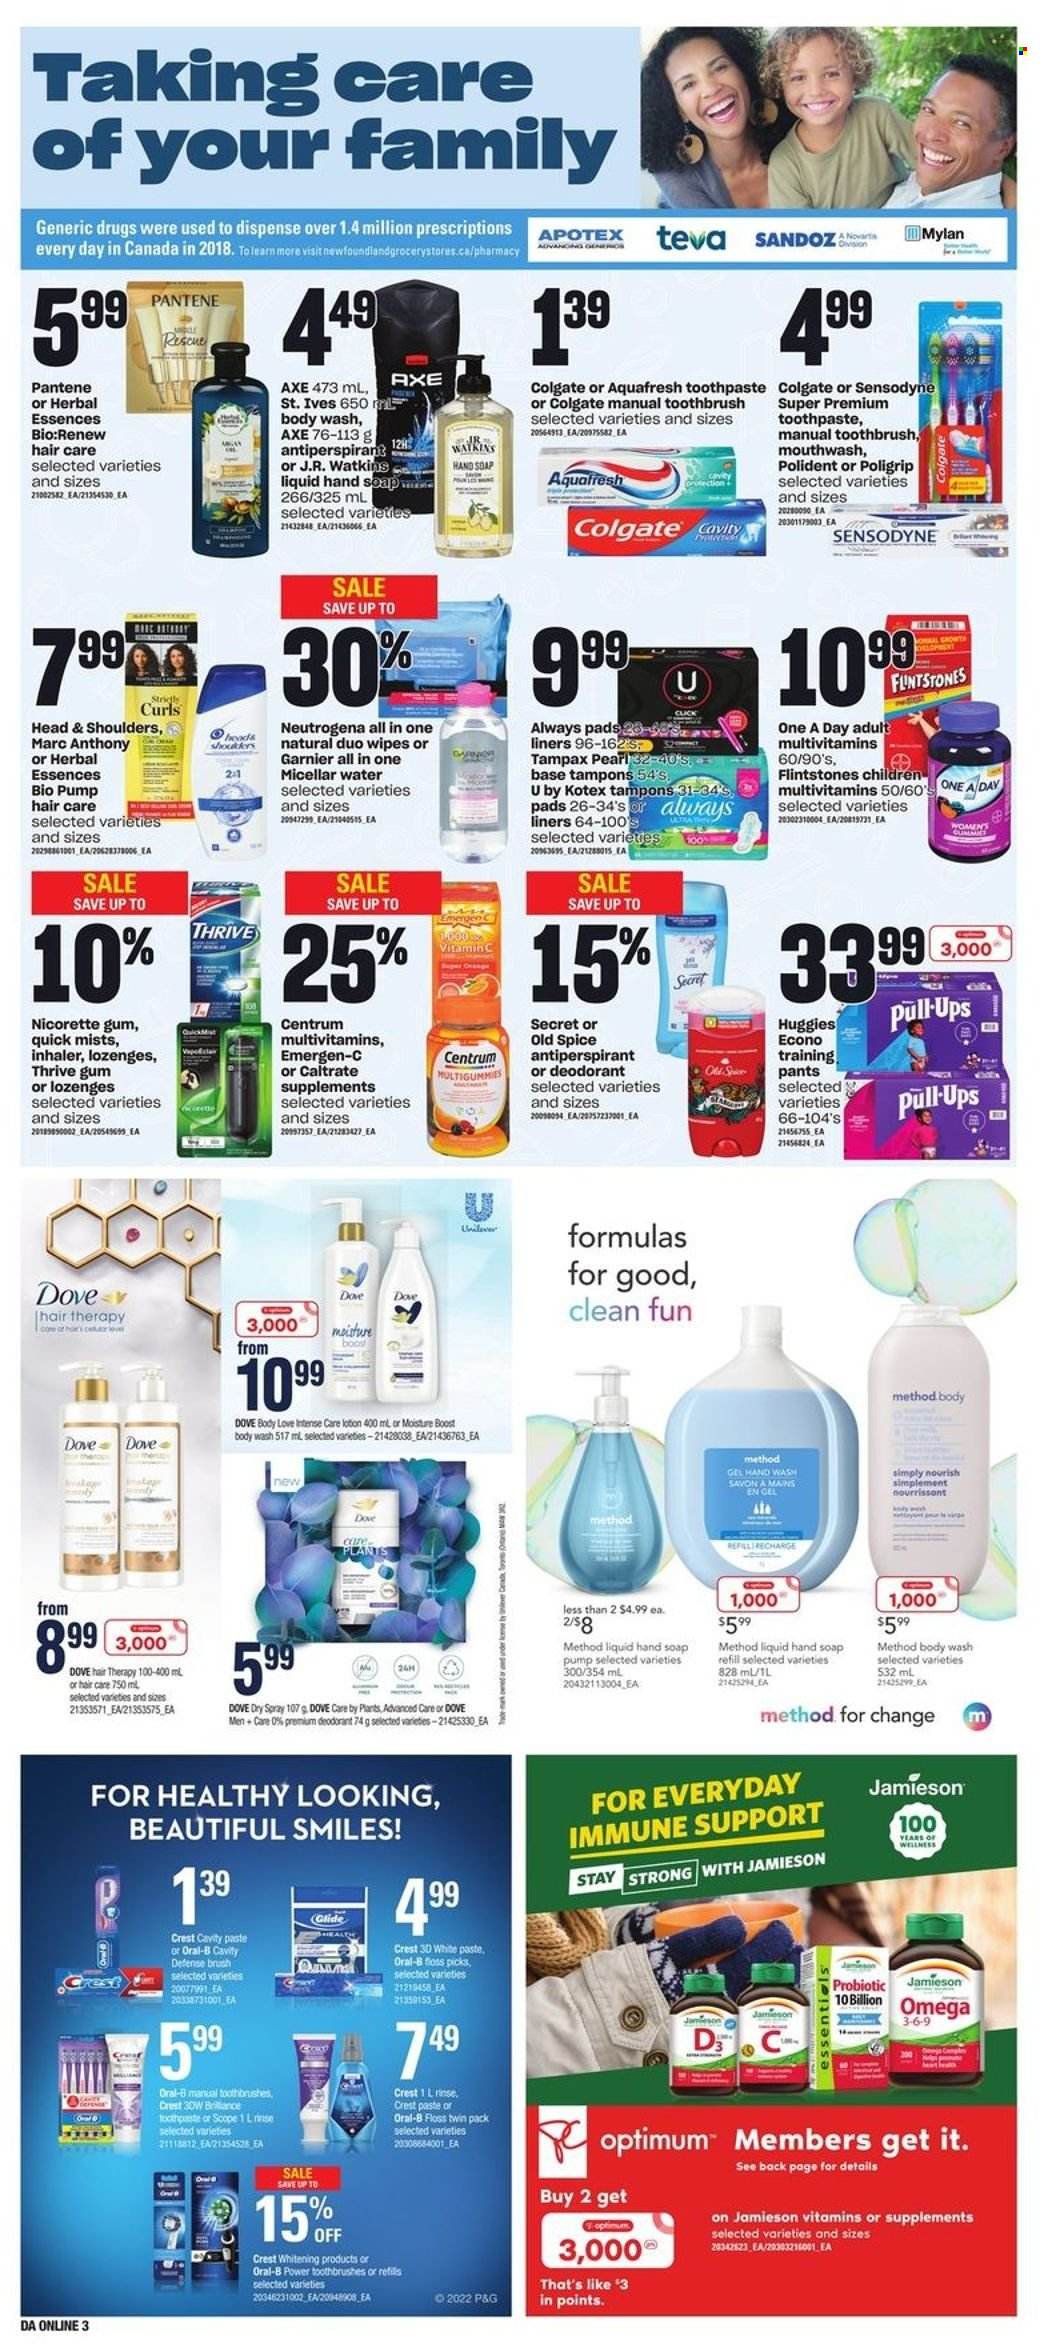 thumbnail - Atlantic Superstore Flyer - December 01, 2022 - December 07, 2022 - Sales products - Dove, spice, Boost, wipes, pants, baby pants, Always liners, body wash, hand soap, hand wash, soap, toothbrush, toothpaste, mouthwash, Polident, Crest, Always pads, Kotex, tampons, micellar water, Herbal Essences, body lotion, anti-perspirant, Axe, Optimum, multivitamin, Nicorette, vitamin c, Omega-3, Emergen-C, Nicorette Gum, Centrum, Colgate, Garnier, Neutrogena, Tampax, Head & Shoulders, Huggies, Pantene, Old Spice, Oral-B, Sensodyne, deodorant. Page 7.